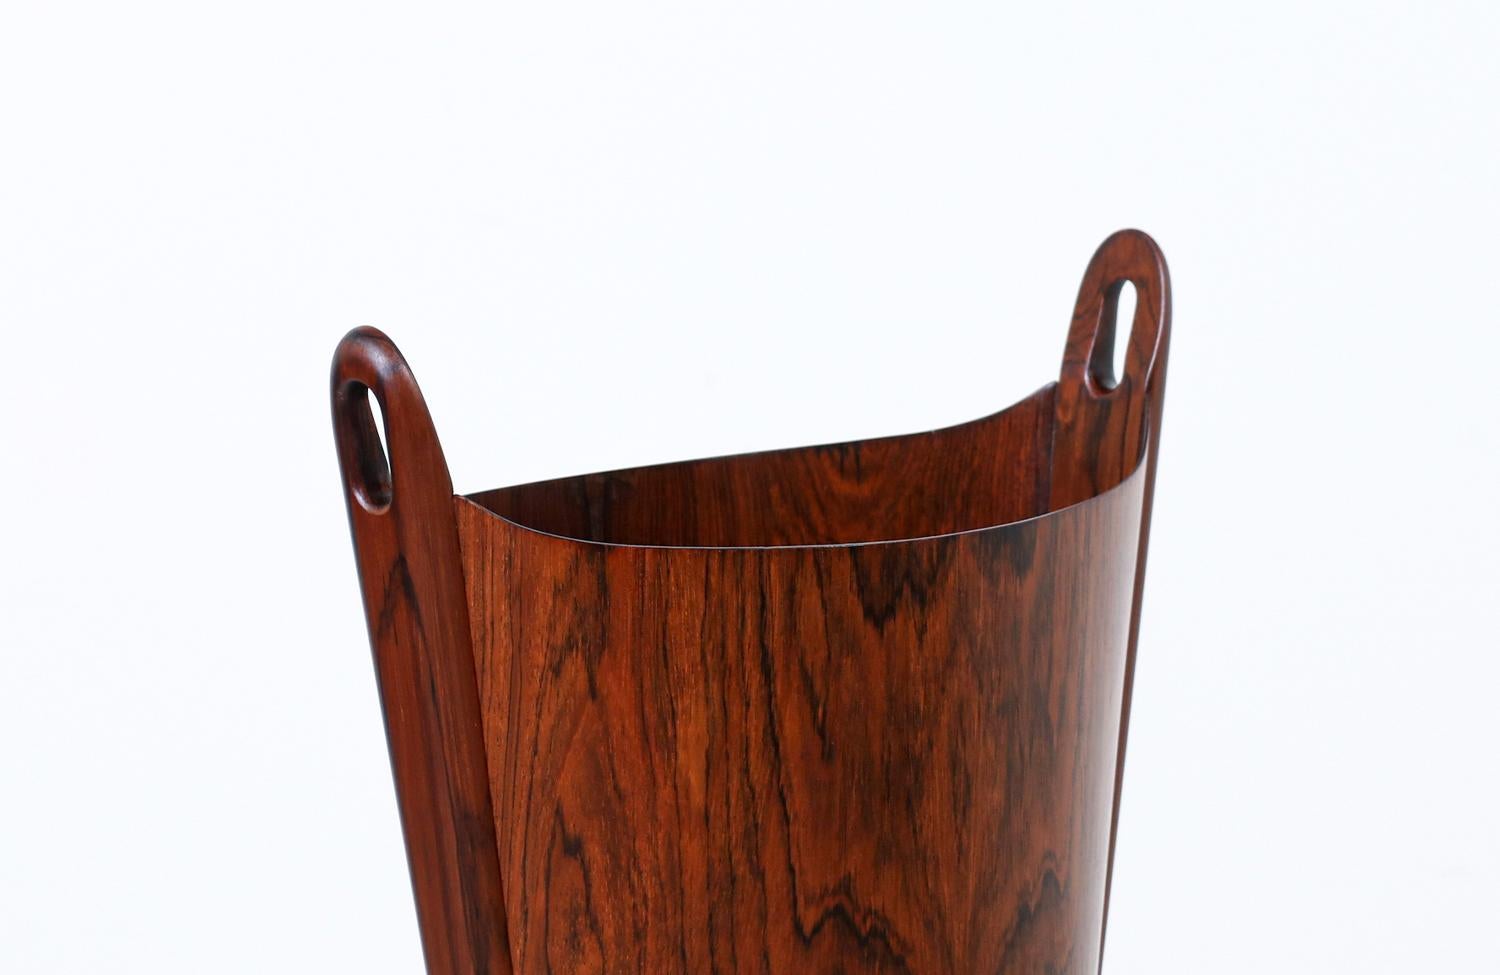 Expertly Restored - Norwegian Modern Rosewood Waste Basket by Einar Barnes In Excellent Condition For Sale In Los Angeles, CA